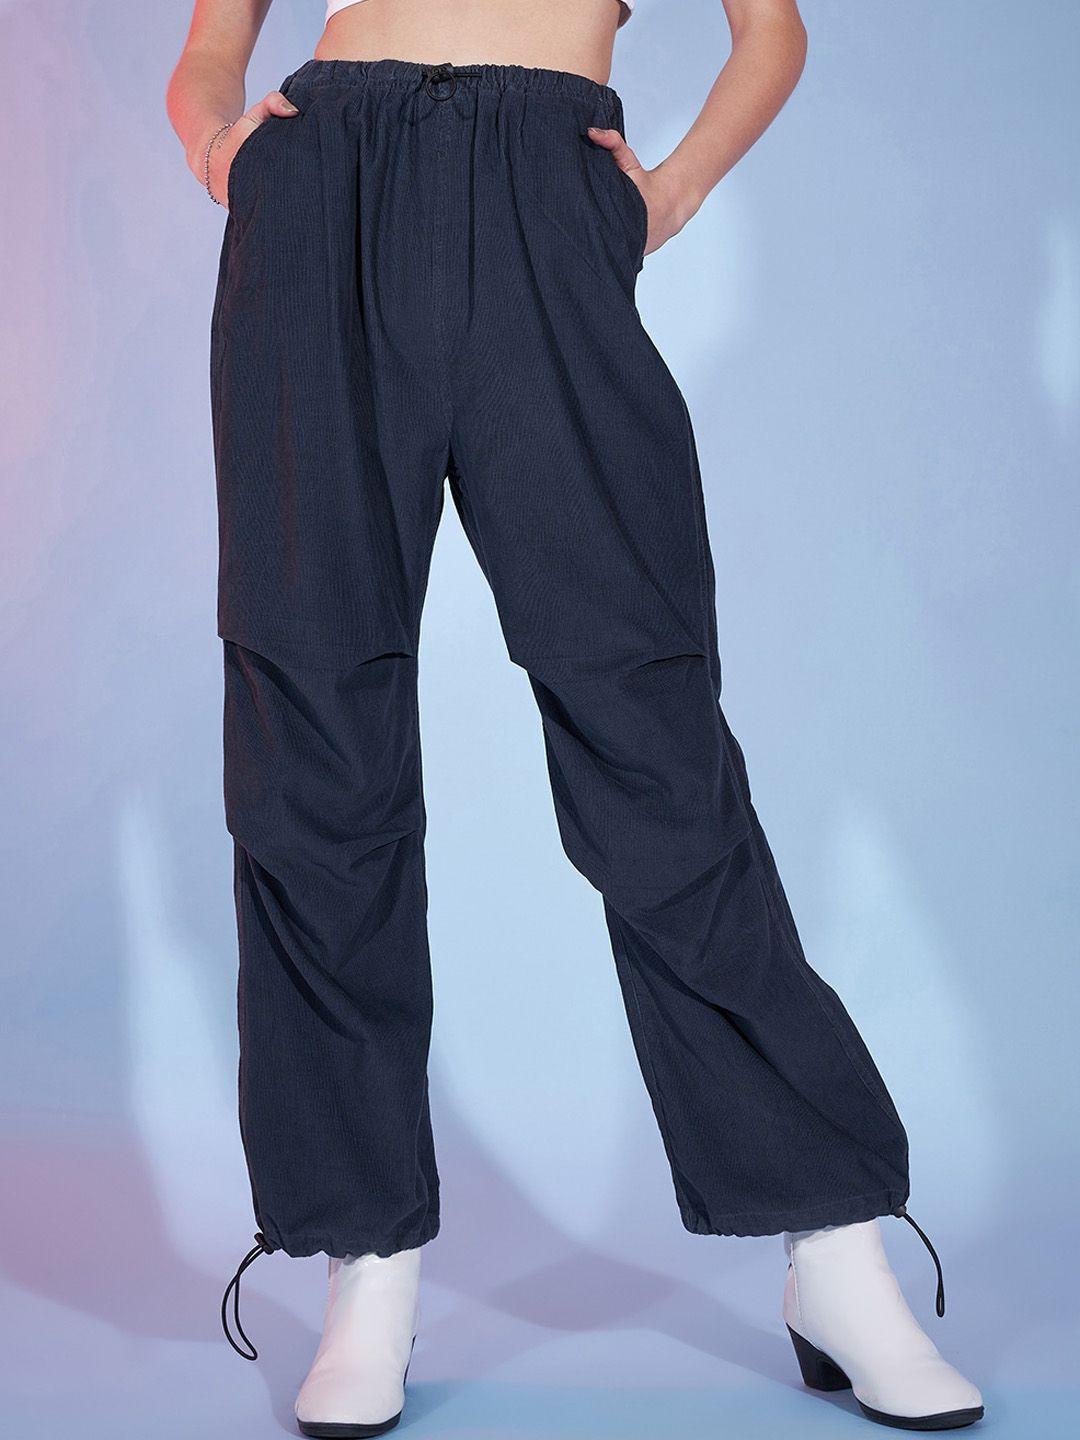 river-of-design-jeans-women-loose-fit-high-rise-corduroy-joggers